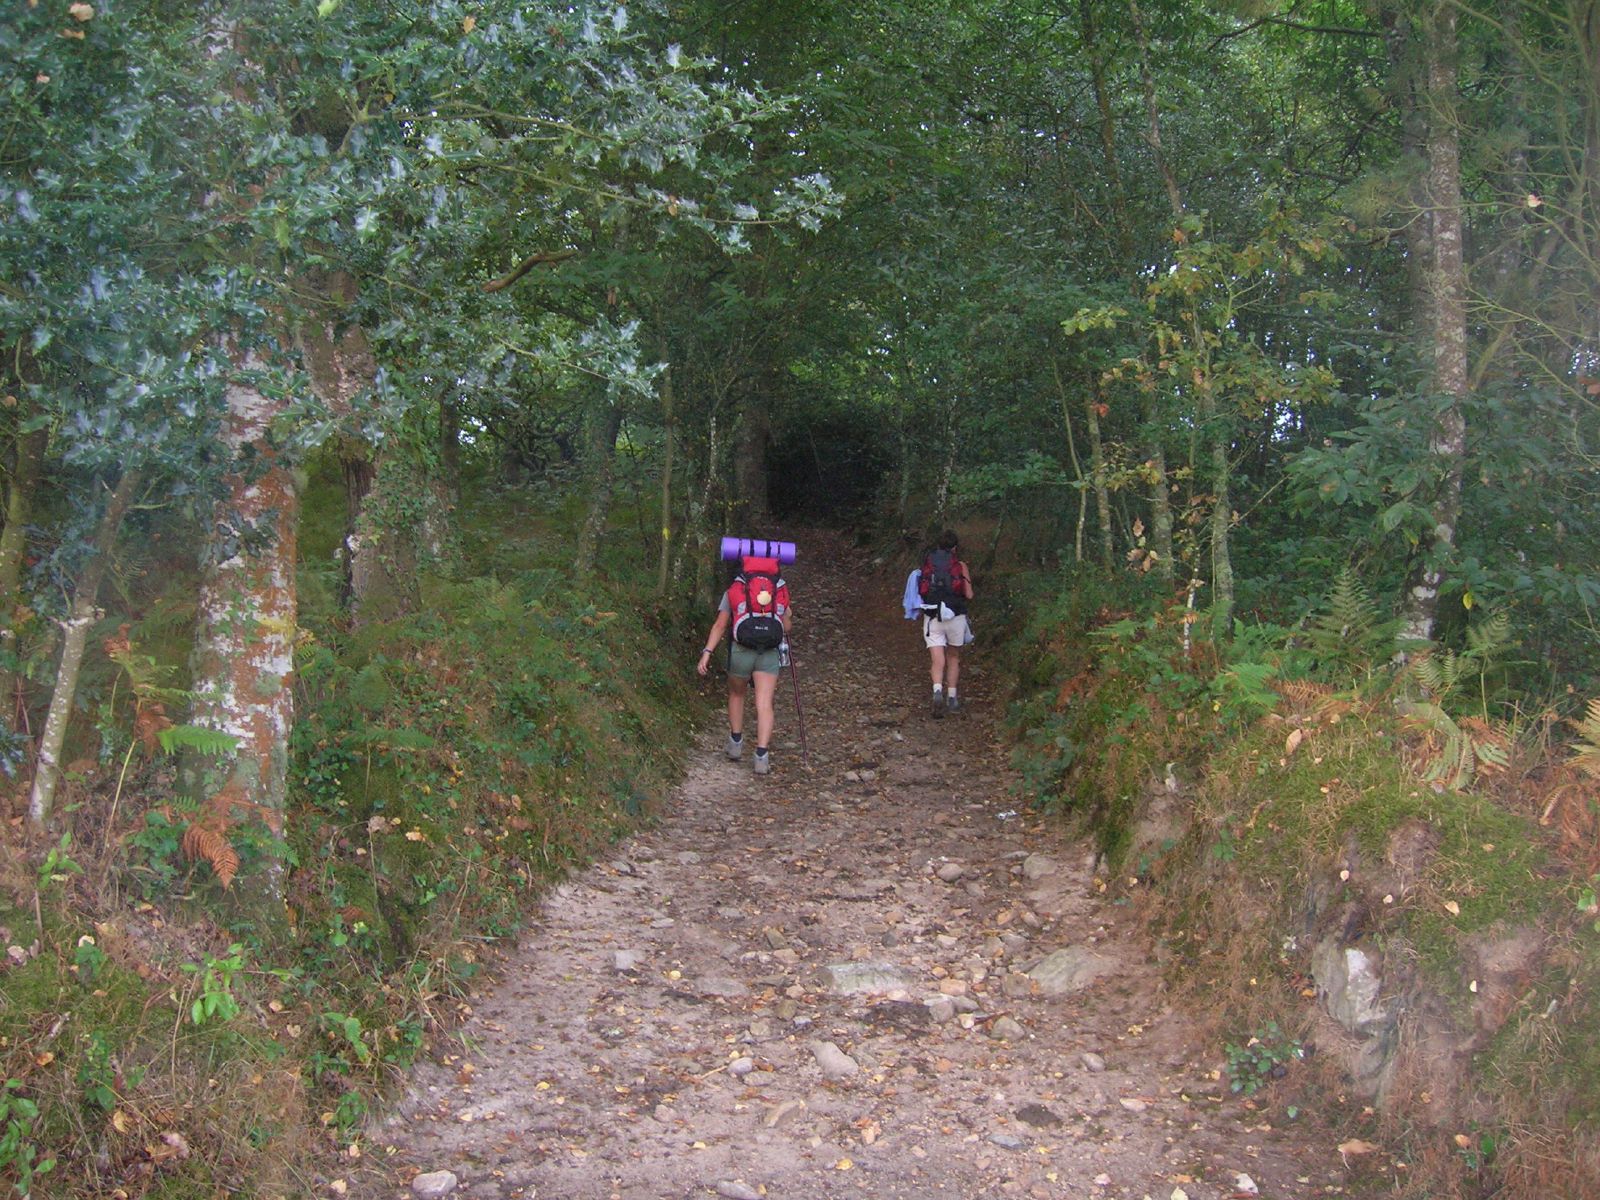 two hikers with packs heading into a wooded area